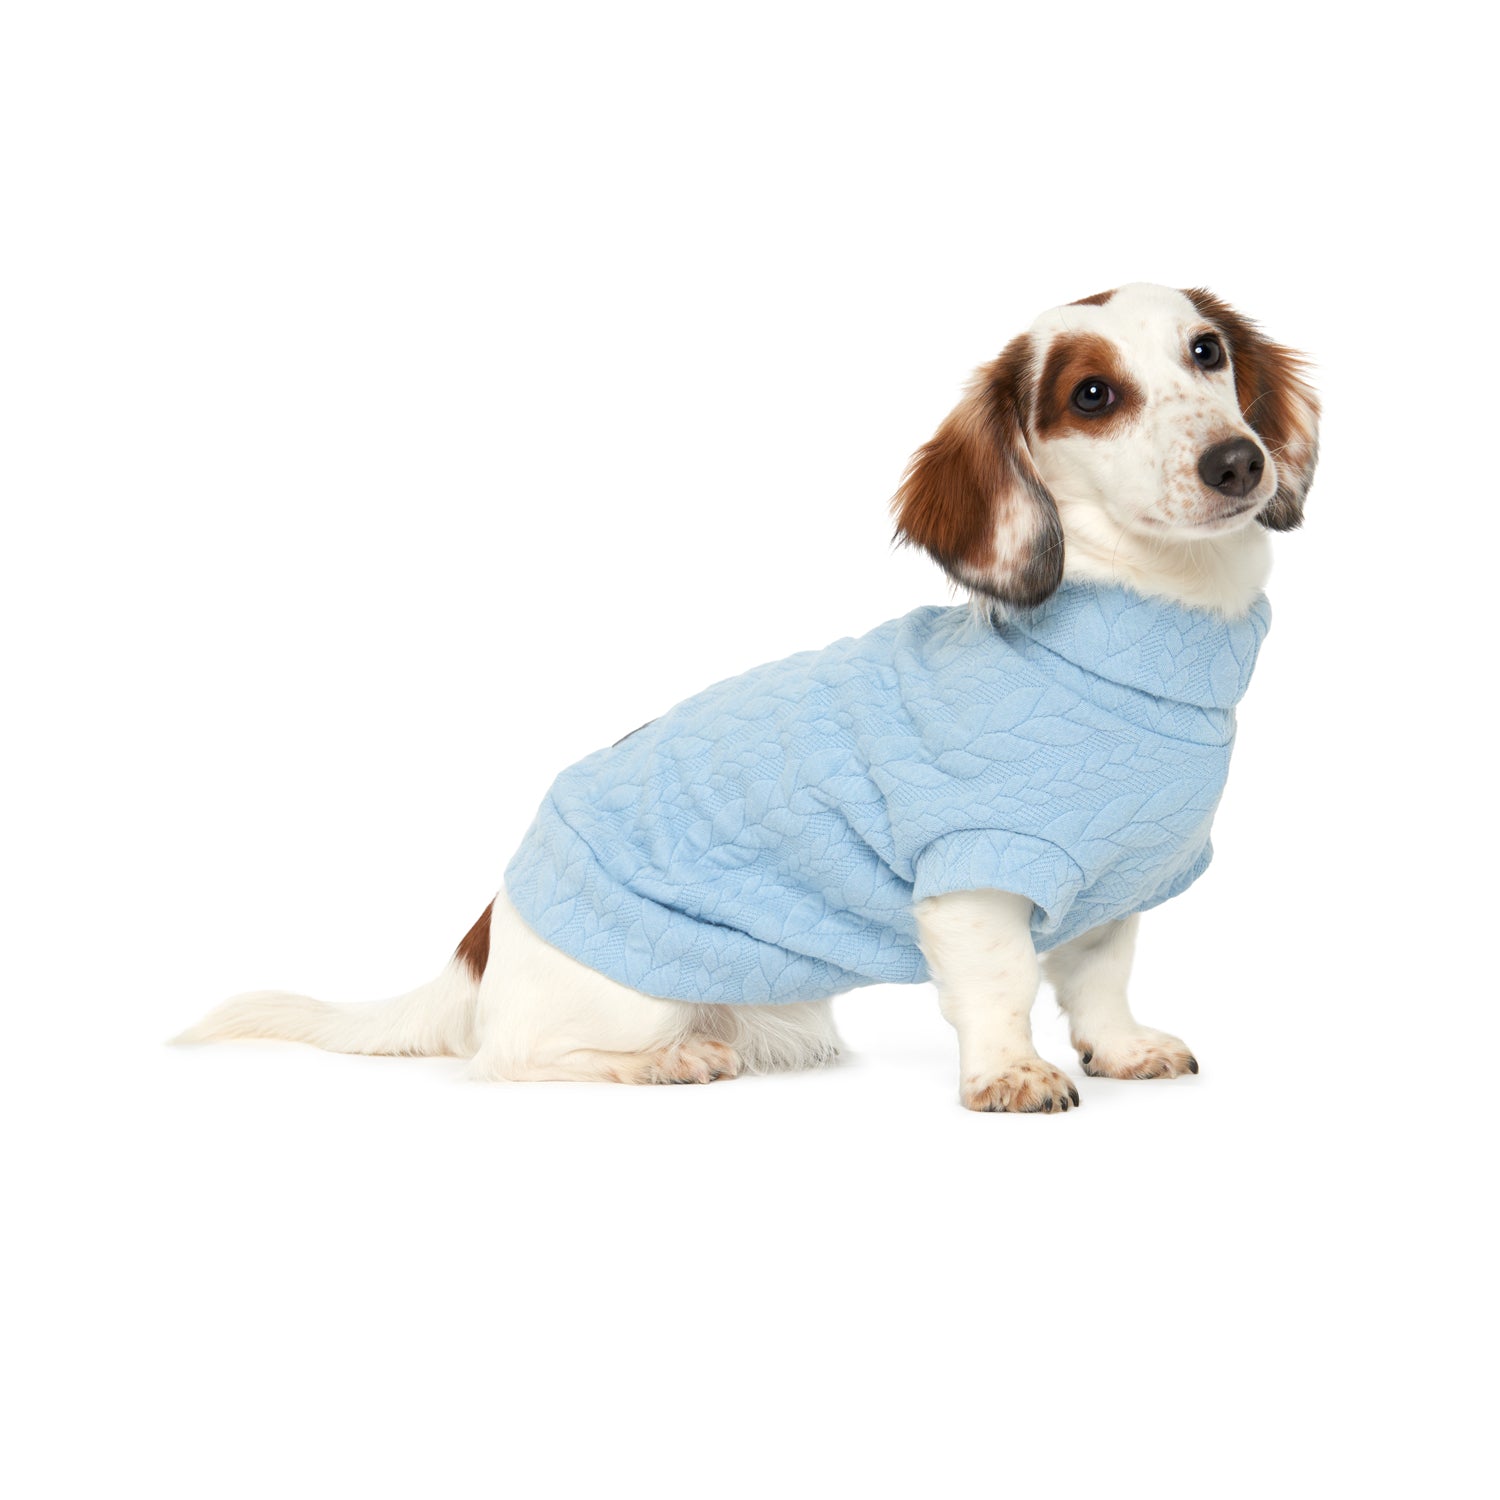 The Ocean Grove Sweater - Dachshund (2XS ONLY LEFT)